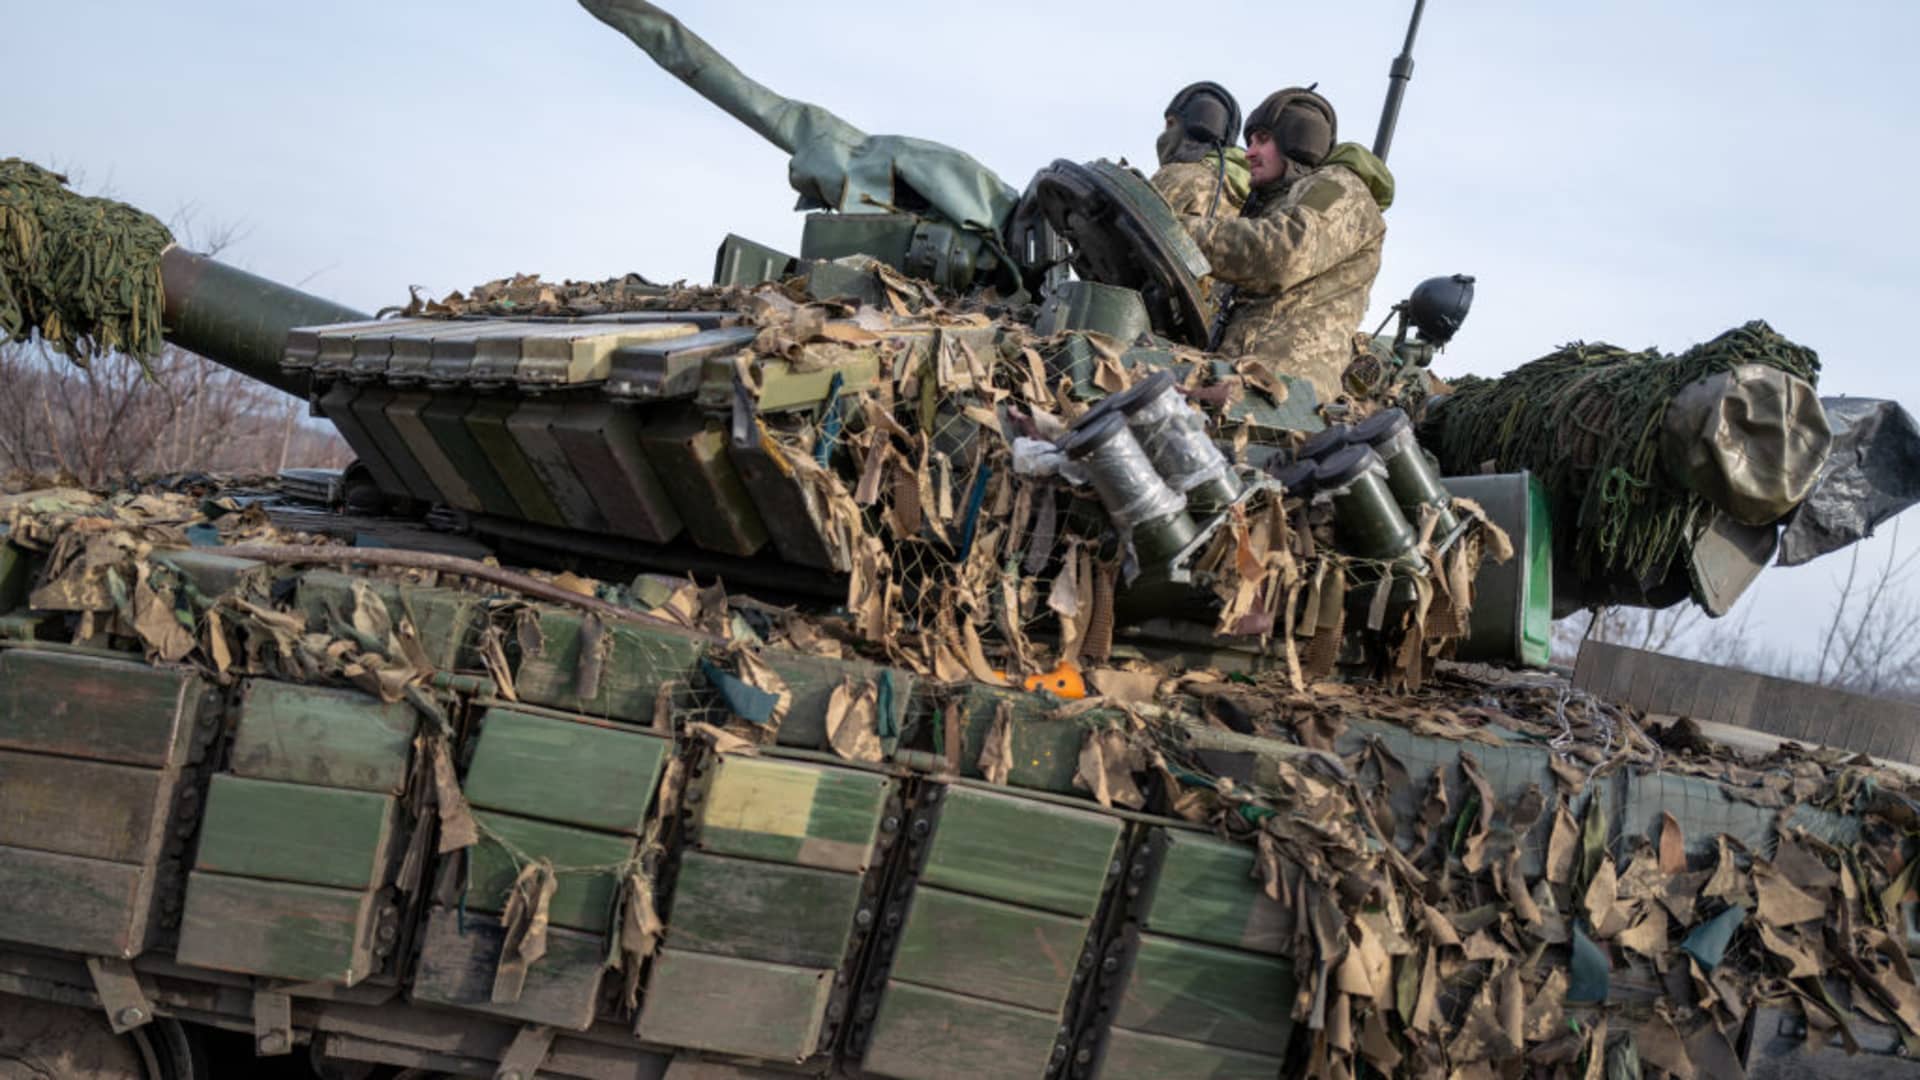 Ukraine war live updates: Berlin sends tanks to Ukraine; Russia says heavy weaponry for Kyiv is a 'blatant provocation'